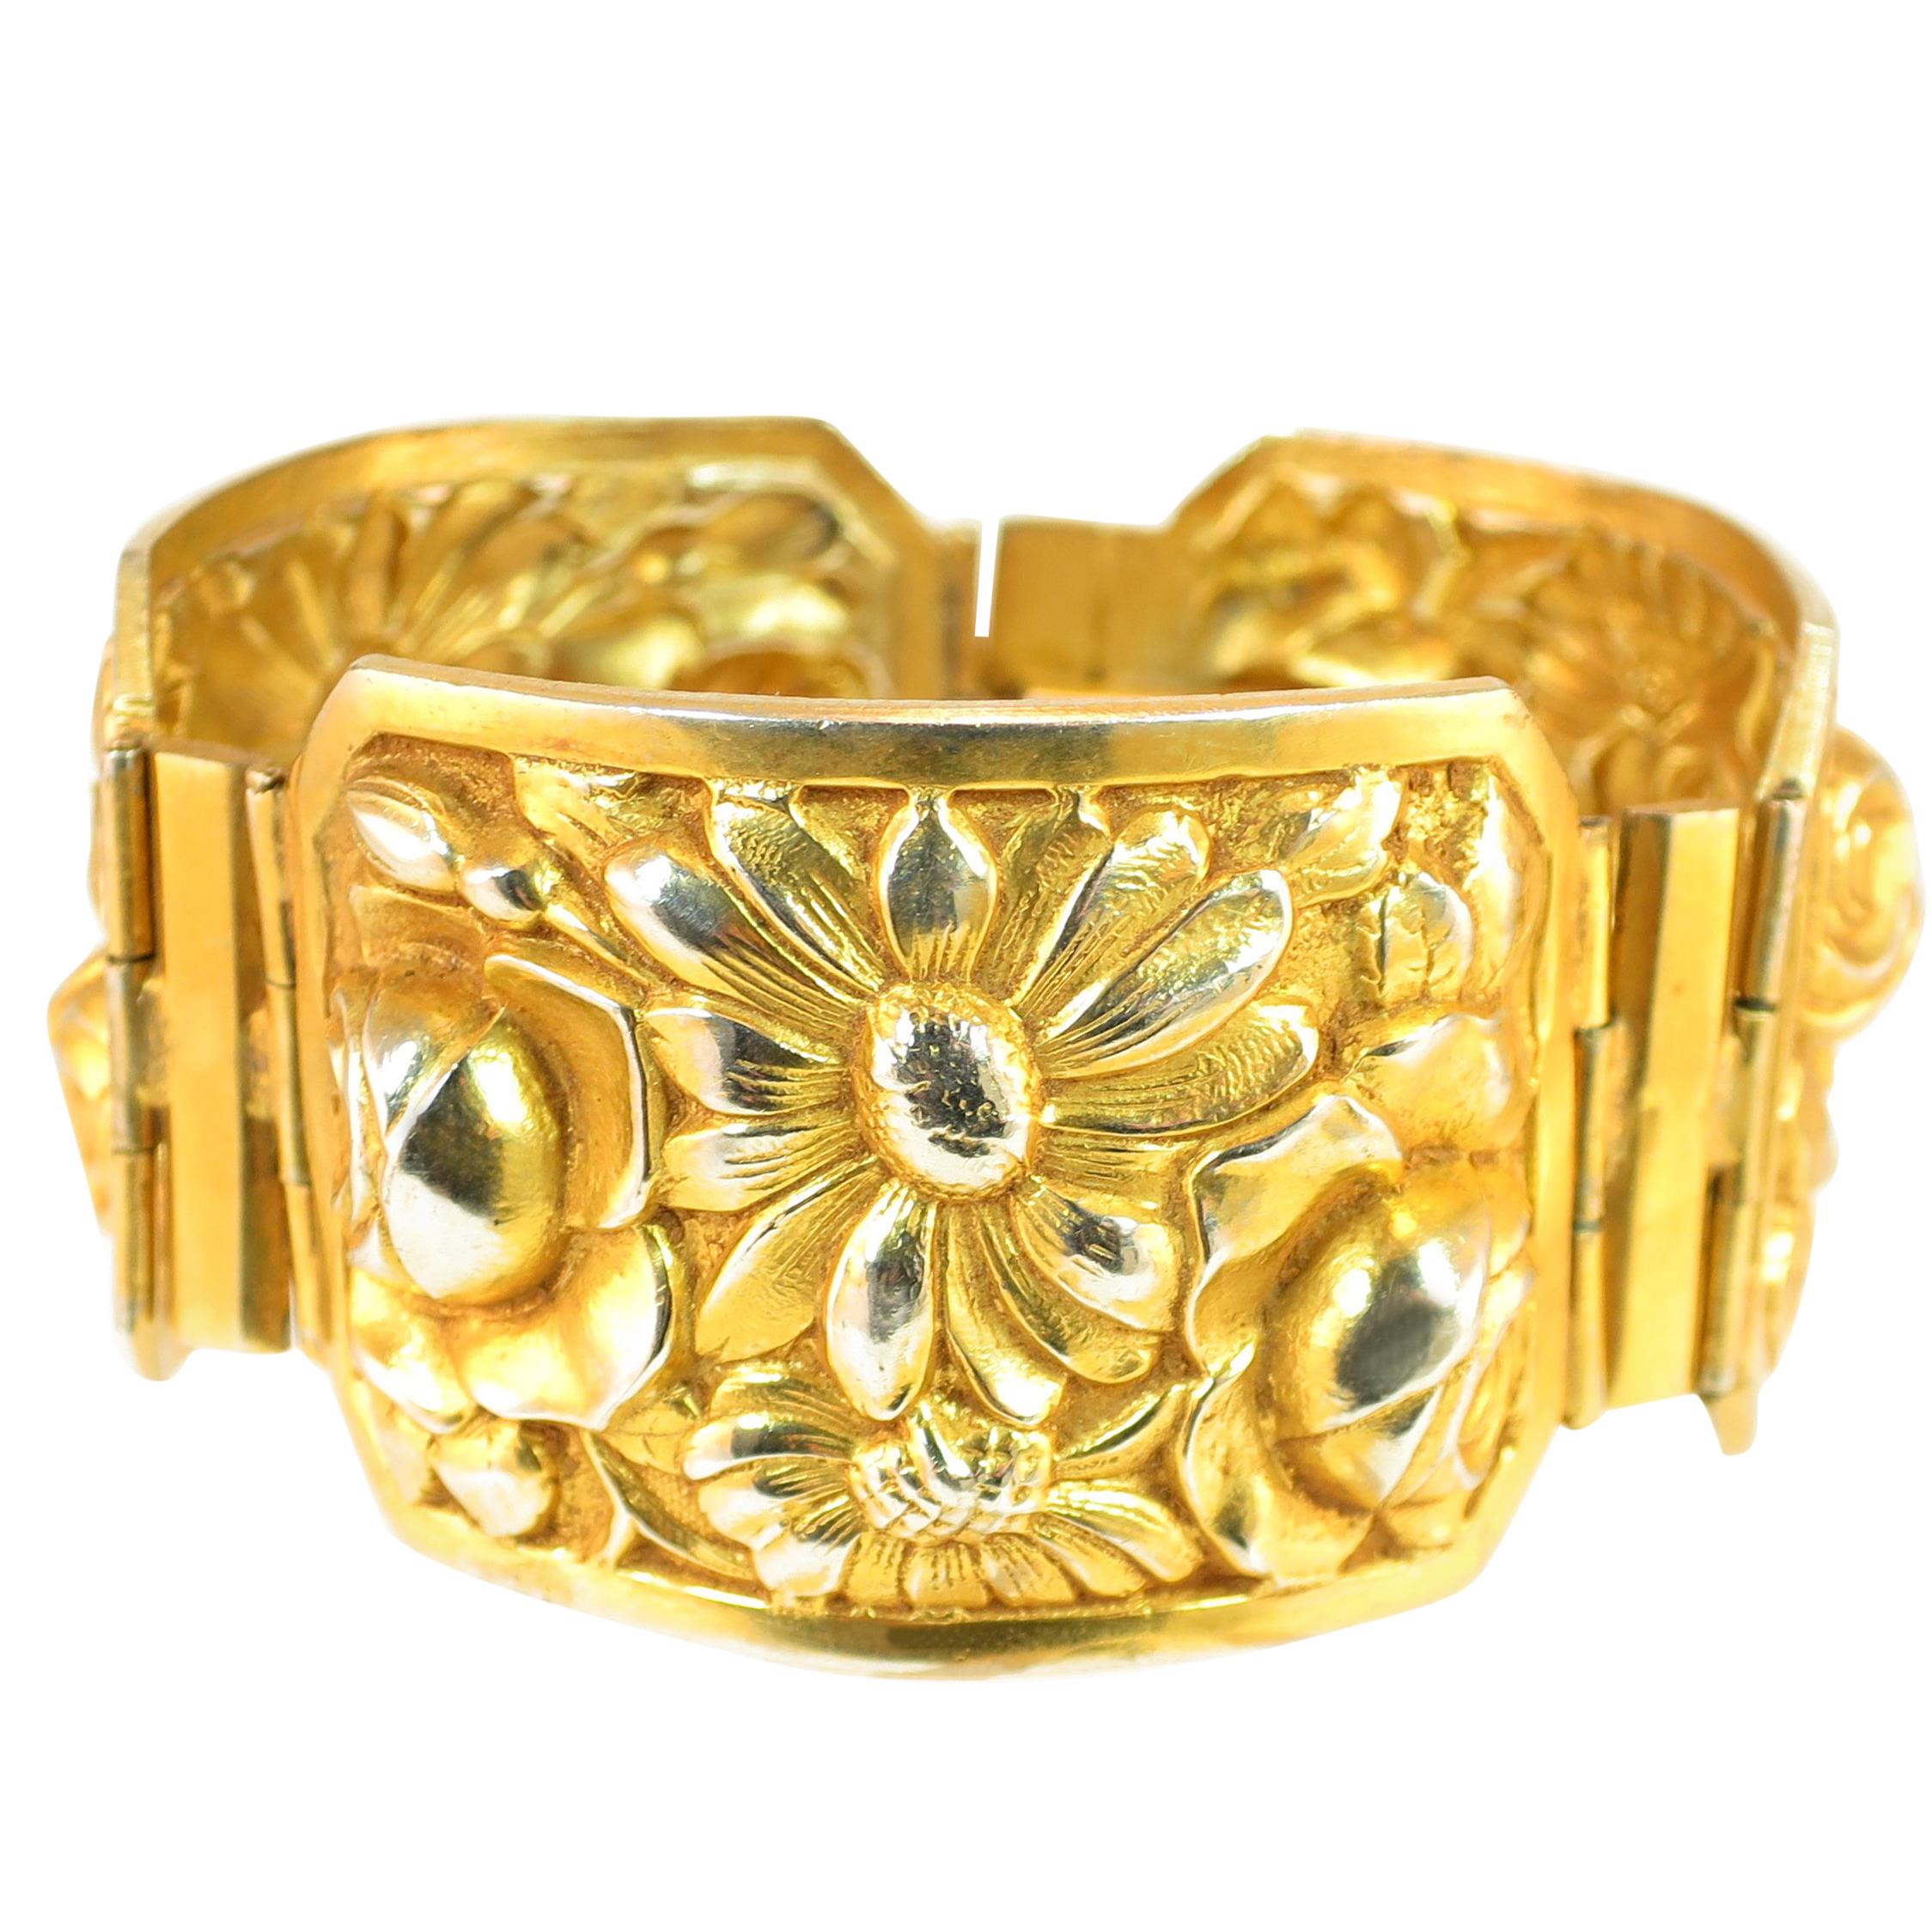 French Art Deco Gilded Floral Repousse Hinged Bracelet, 1920s im Angebot